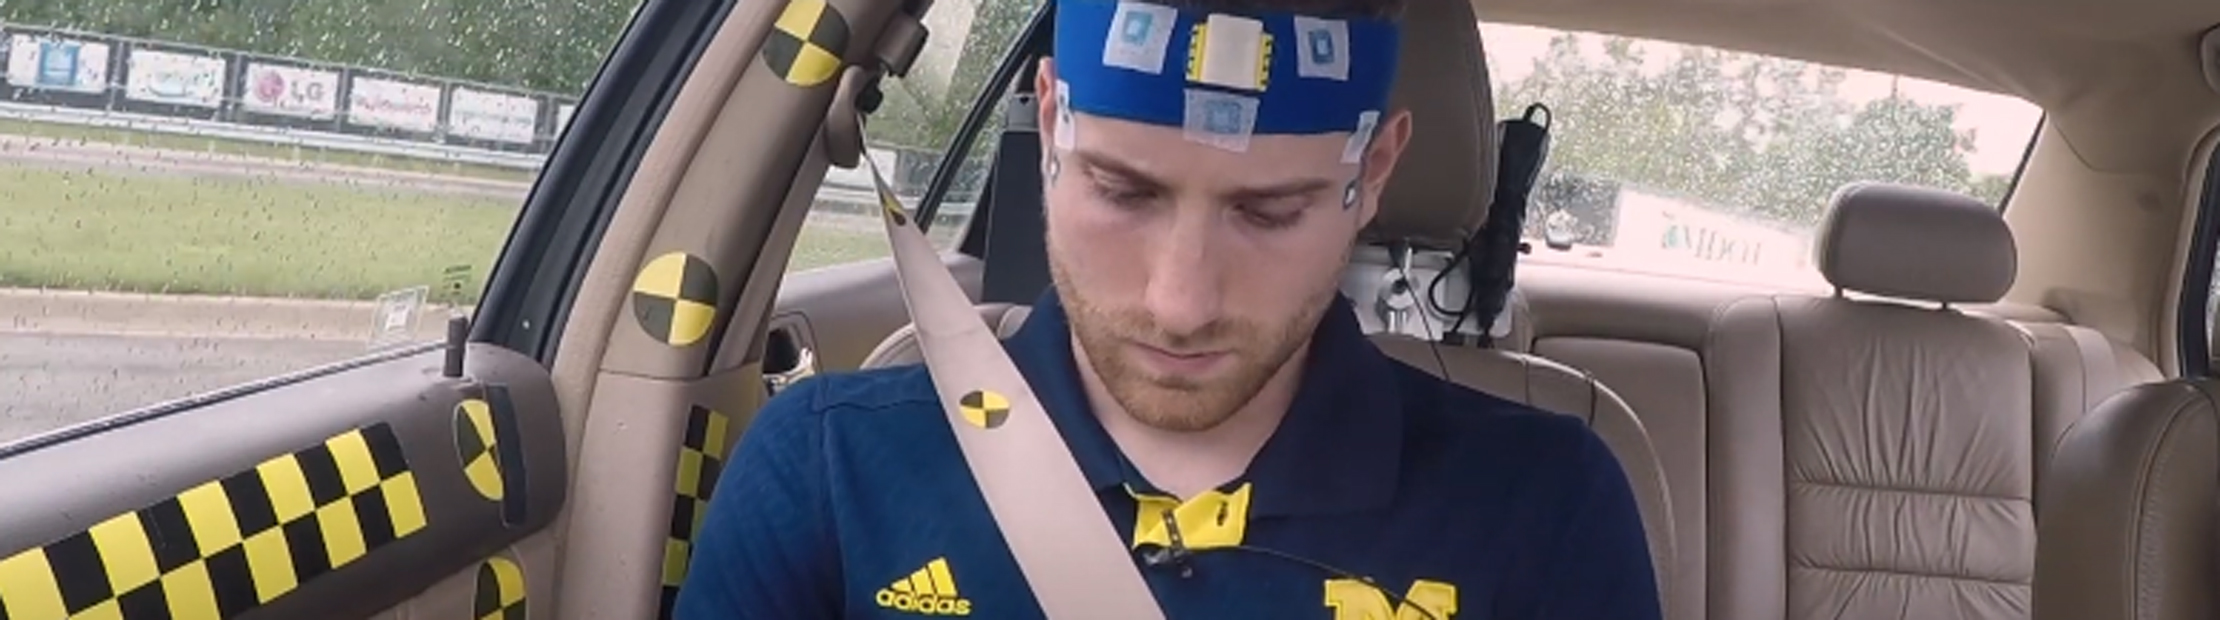 A person in a car wearing health monitoring sensors